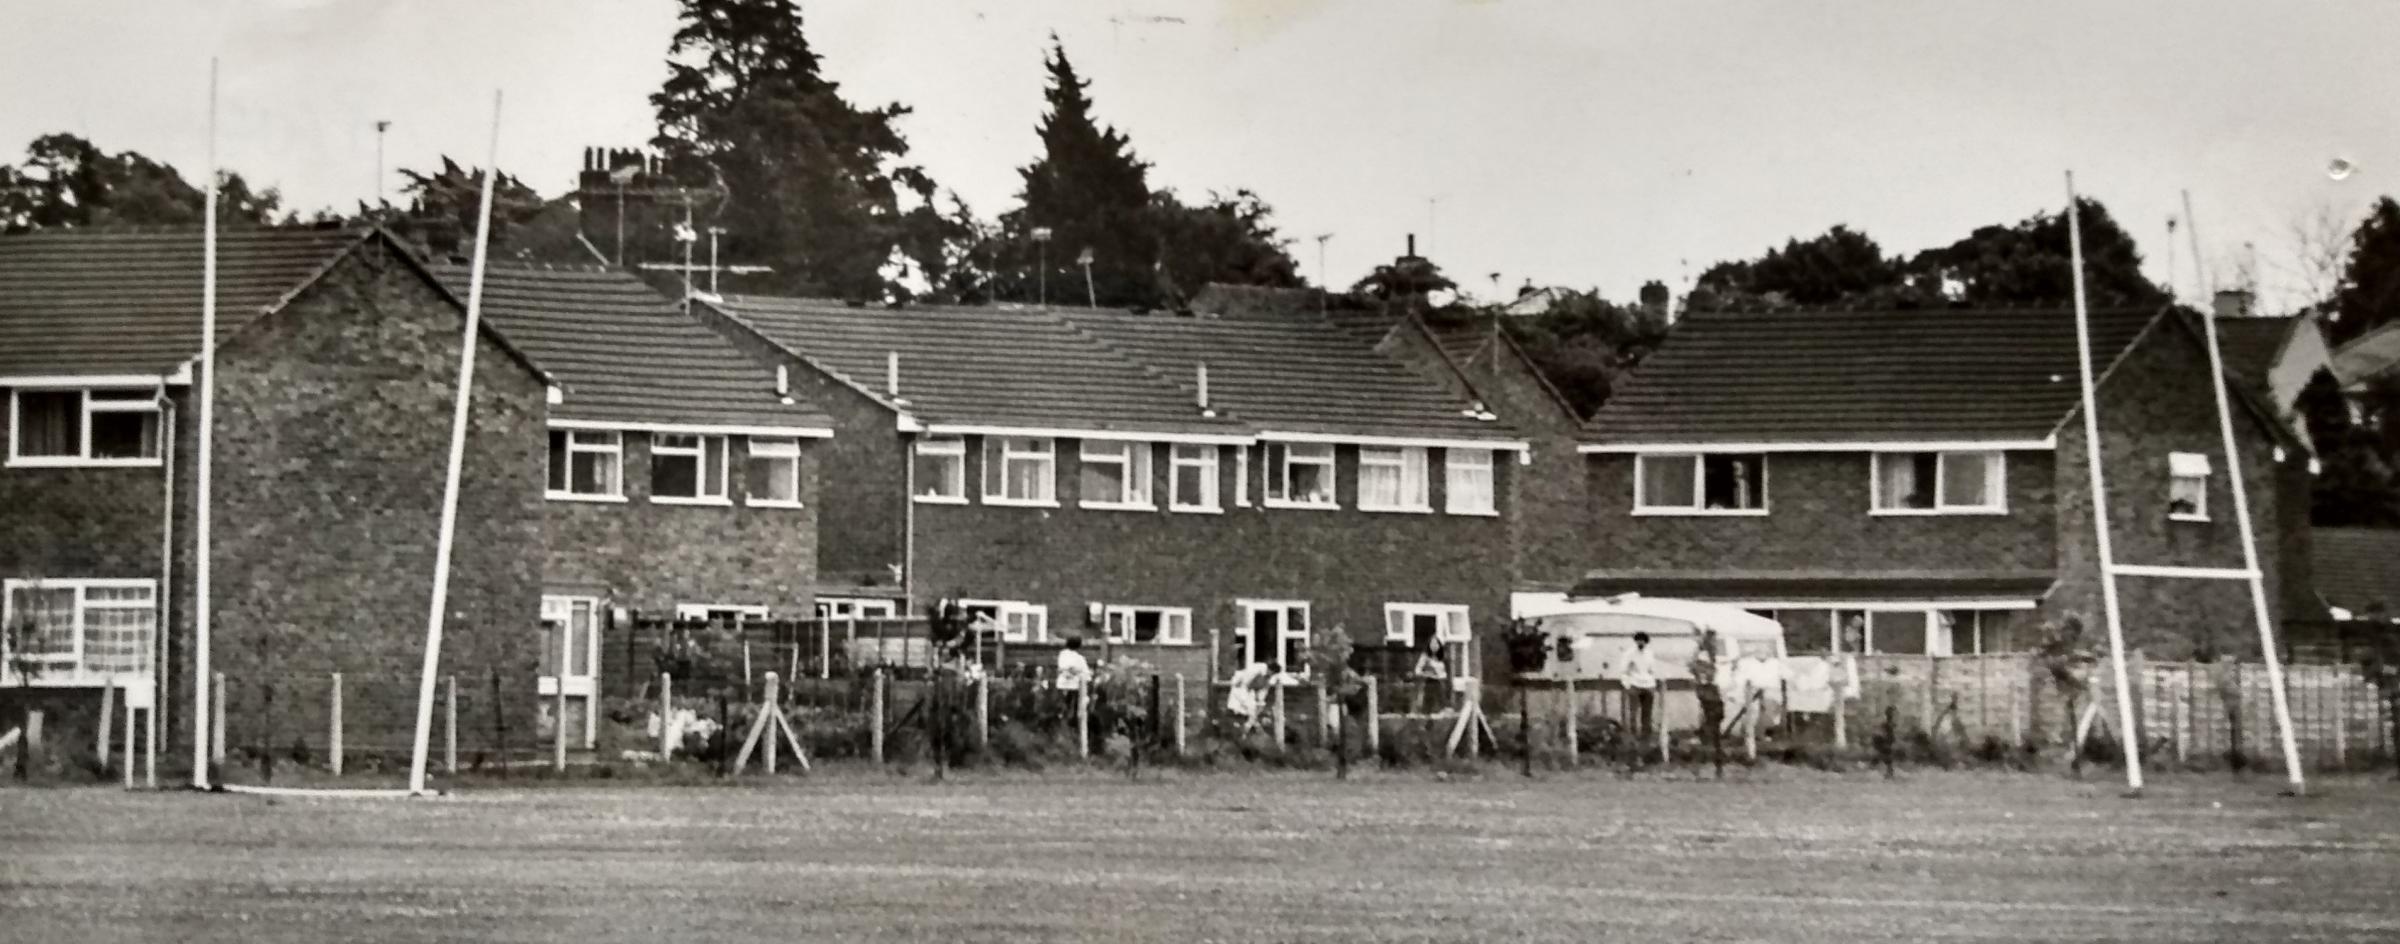 July 1978 and householders on the Four Pools estate had just won their battle over the positioning of rugby posts on Evesham High School’s playing field